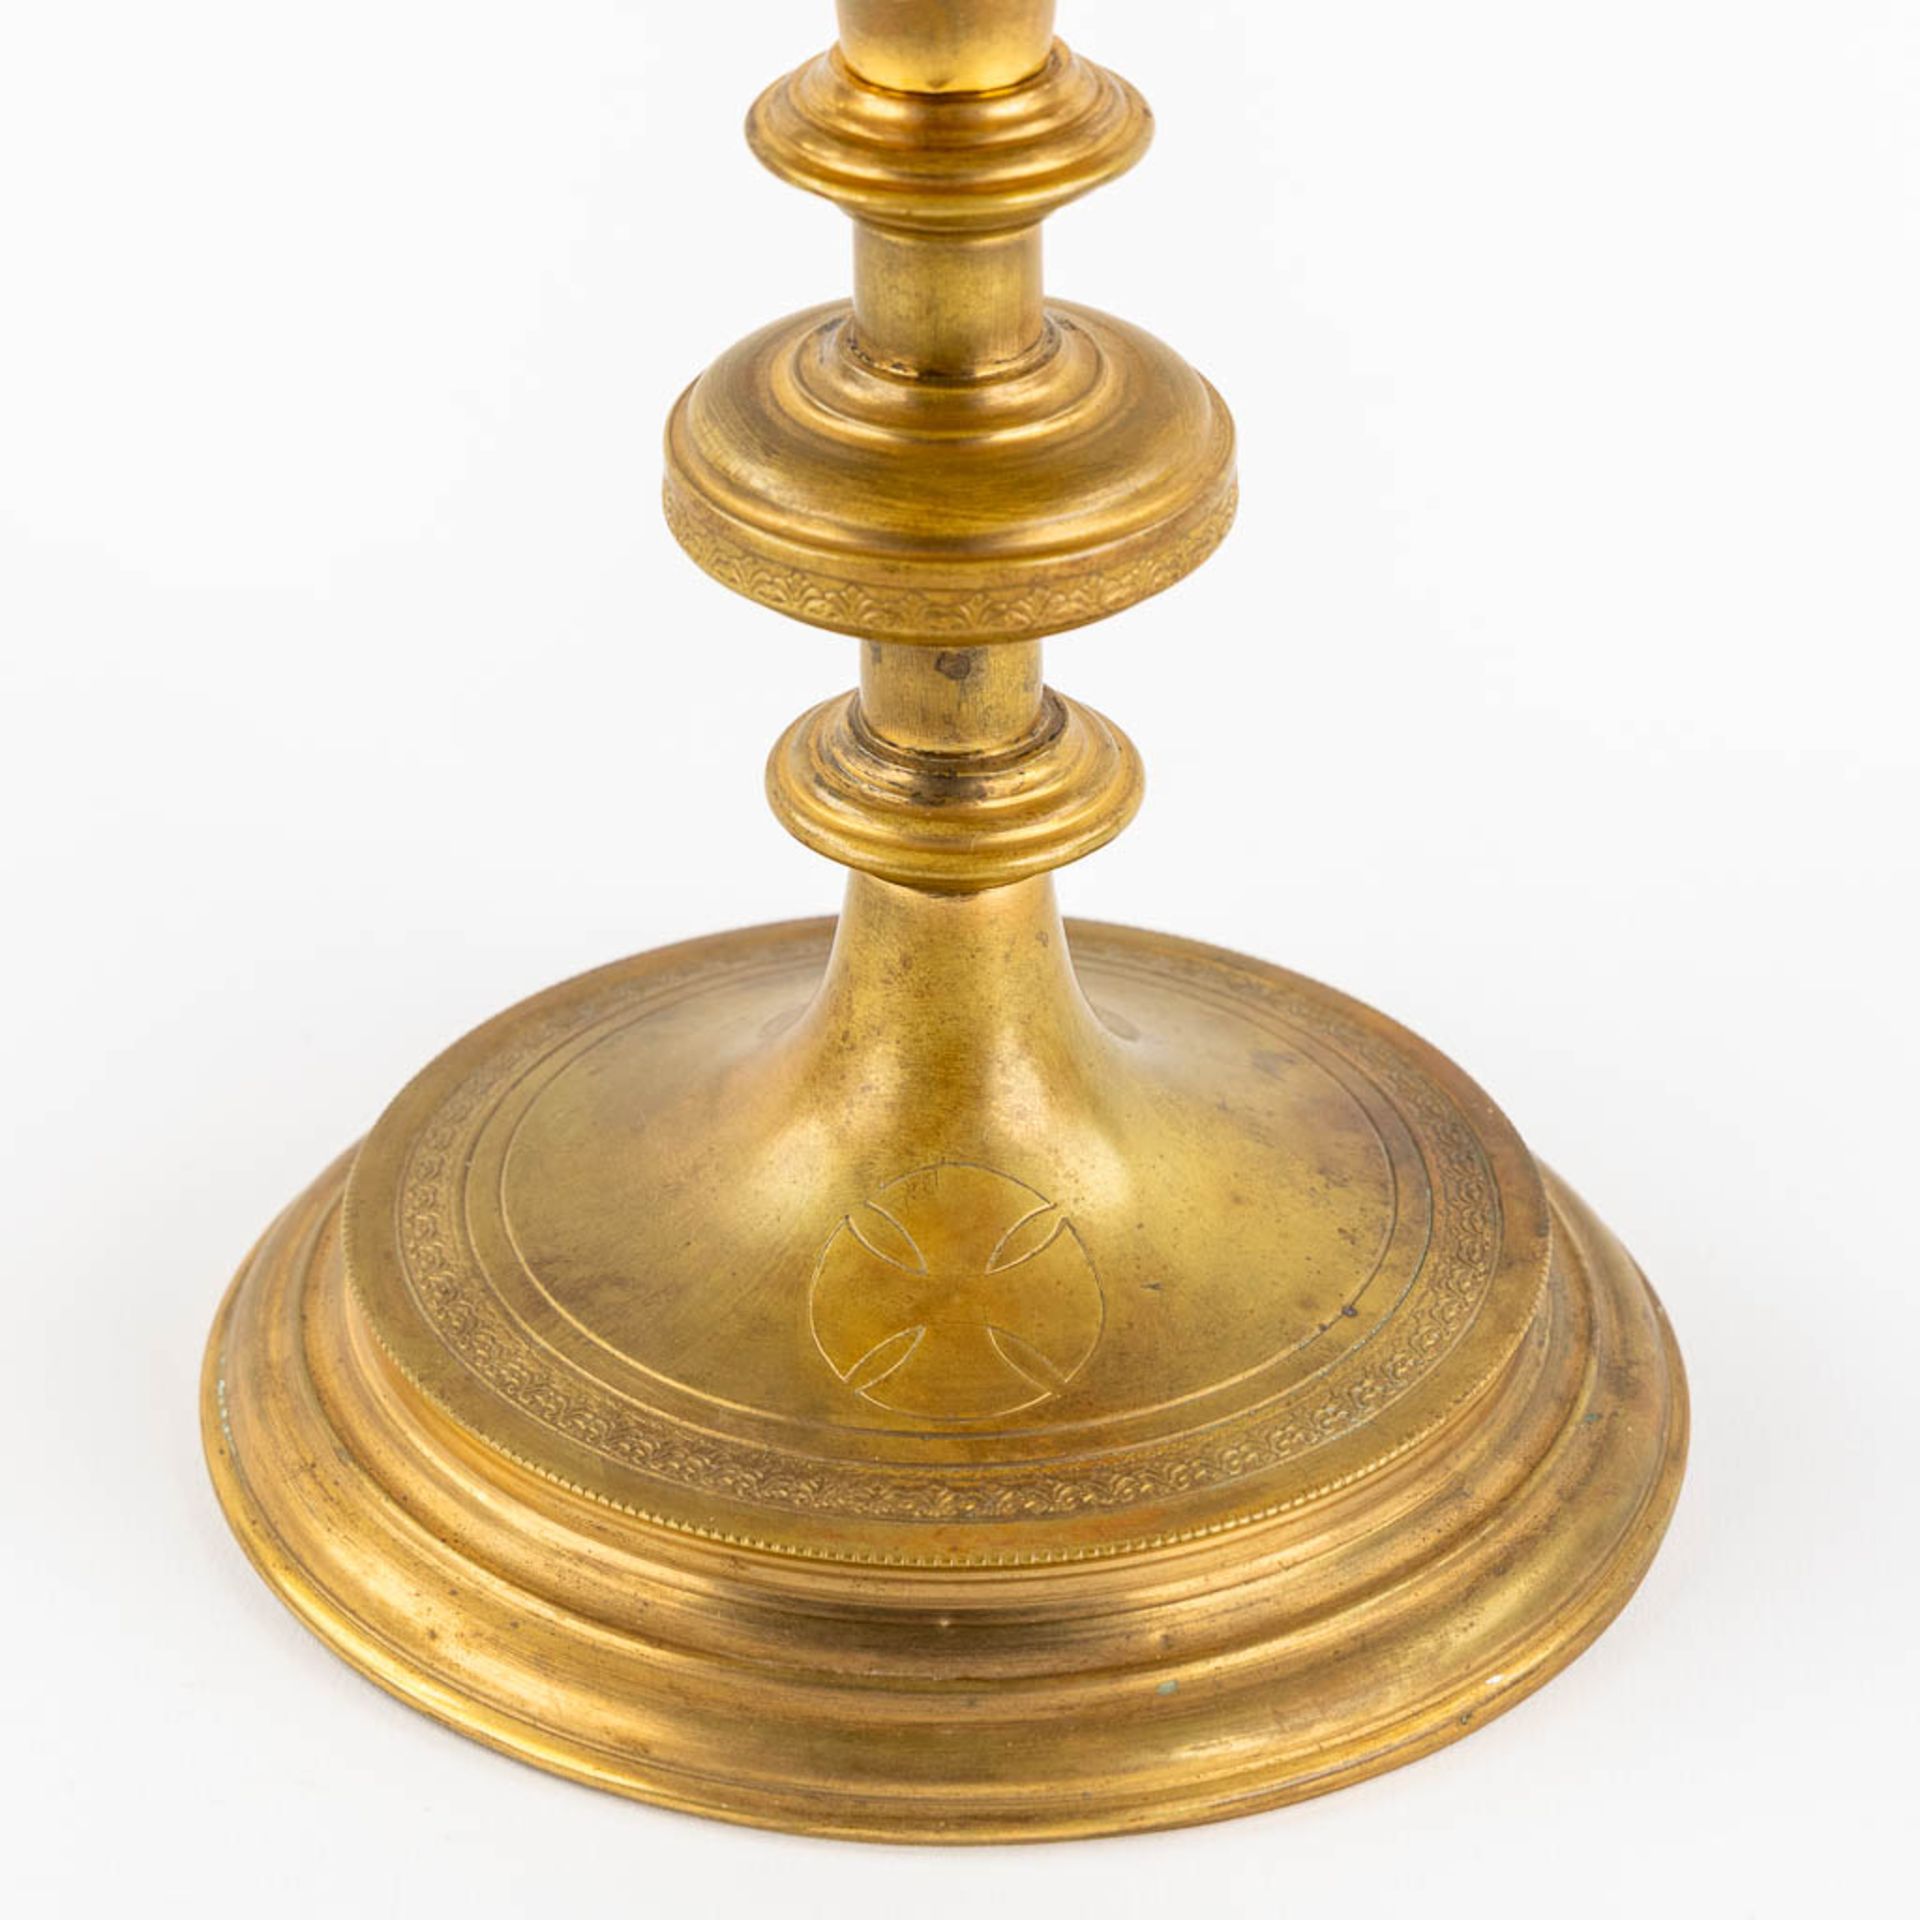 A Tower monstrance, gilt and silver plated brass, Gothic Revival. 19th C. (W:21,5 x H:58 cm) - Image 18 of 22